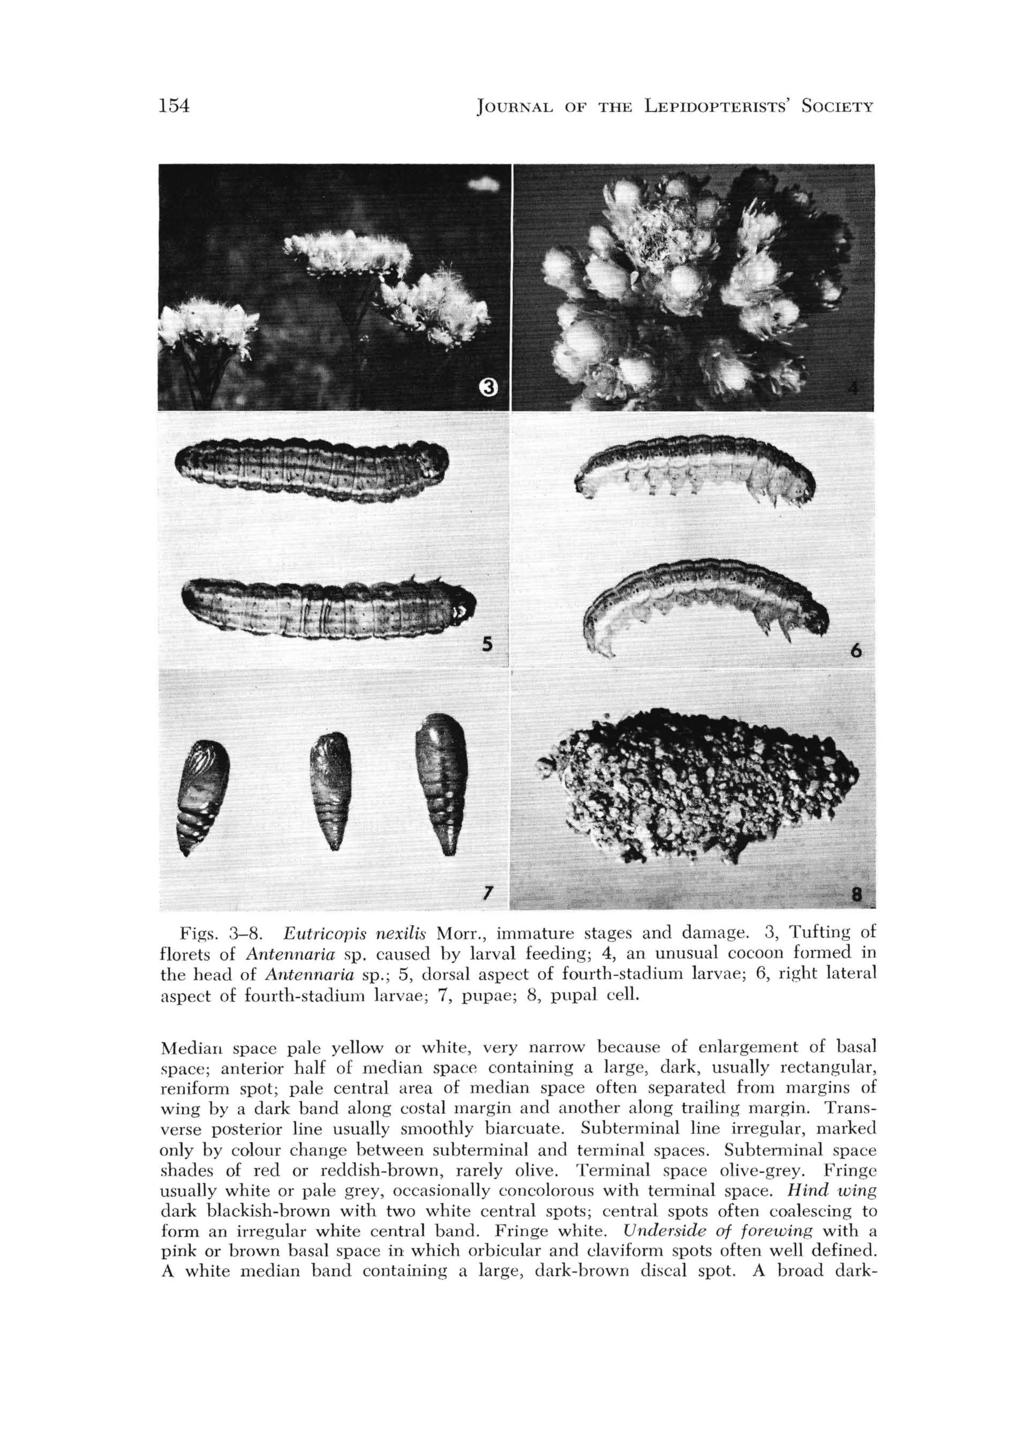 154 JOURNAL OF THE LEPIDOPTERISTS' SOCIETY,, T Figs. 3-8. Eutricopis nex'ilis Morr., immature stages and damage. 3, Tufting of florets of Antennaria sp.